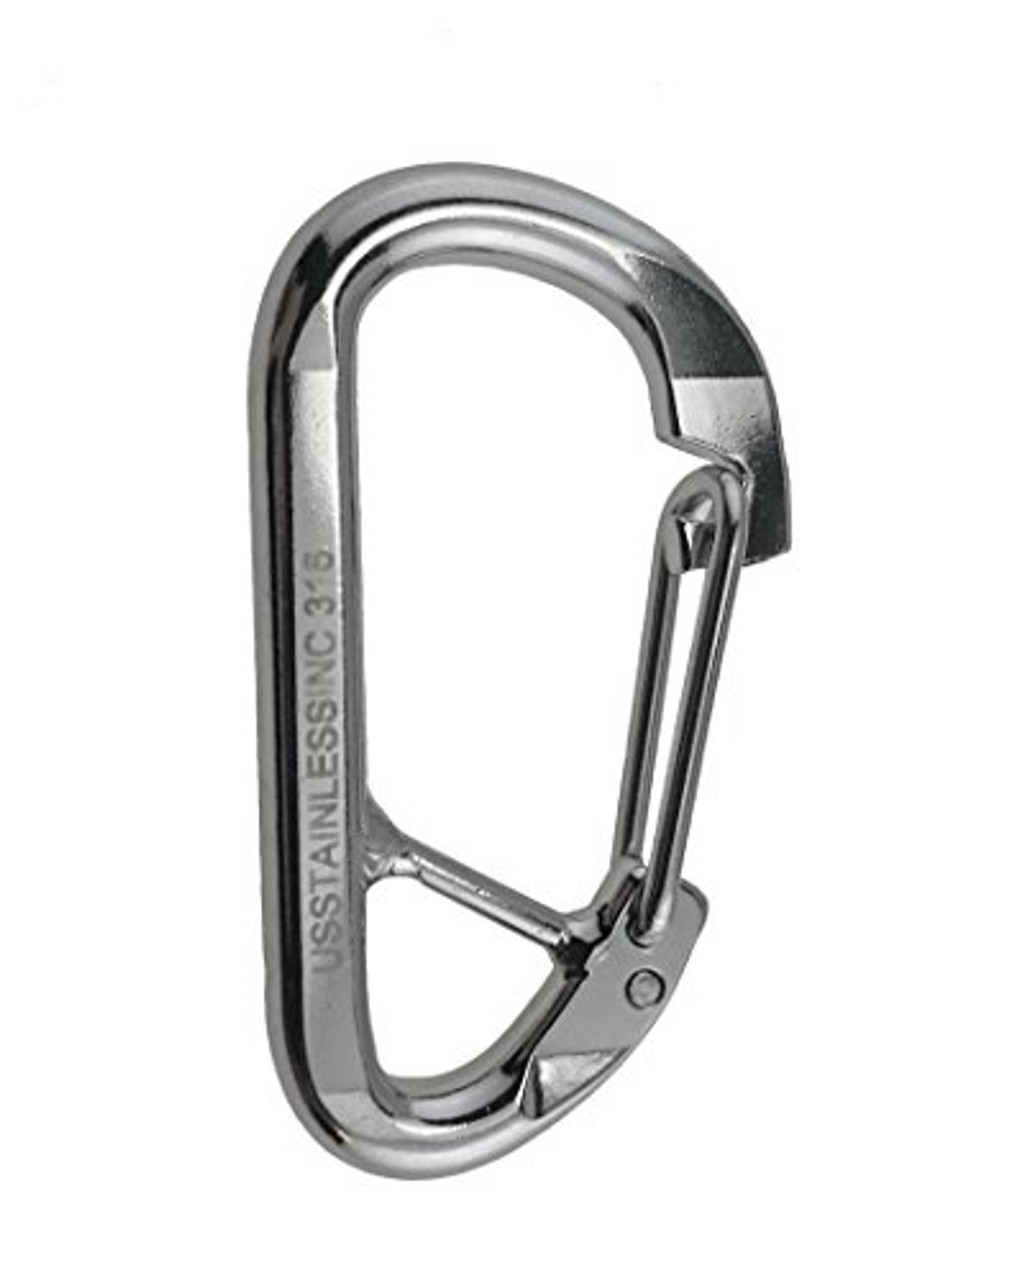 Stainless Steel 316 Spring Hook Carabiner 3/8 (10mm) Marine Grade Safety  Clip Forged